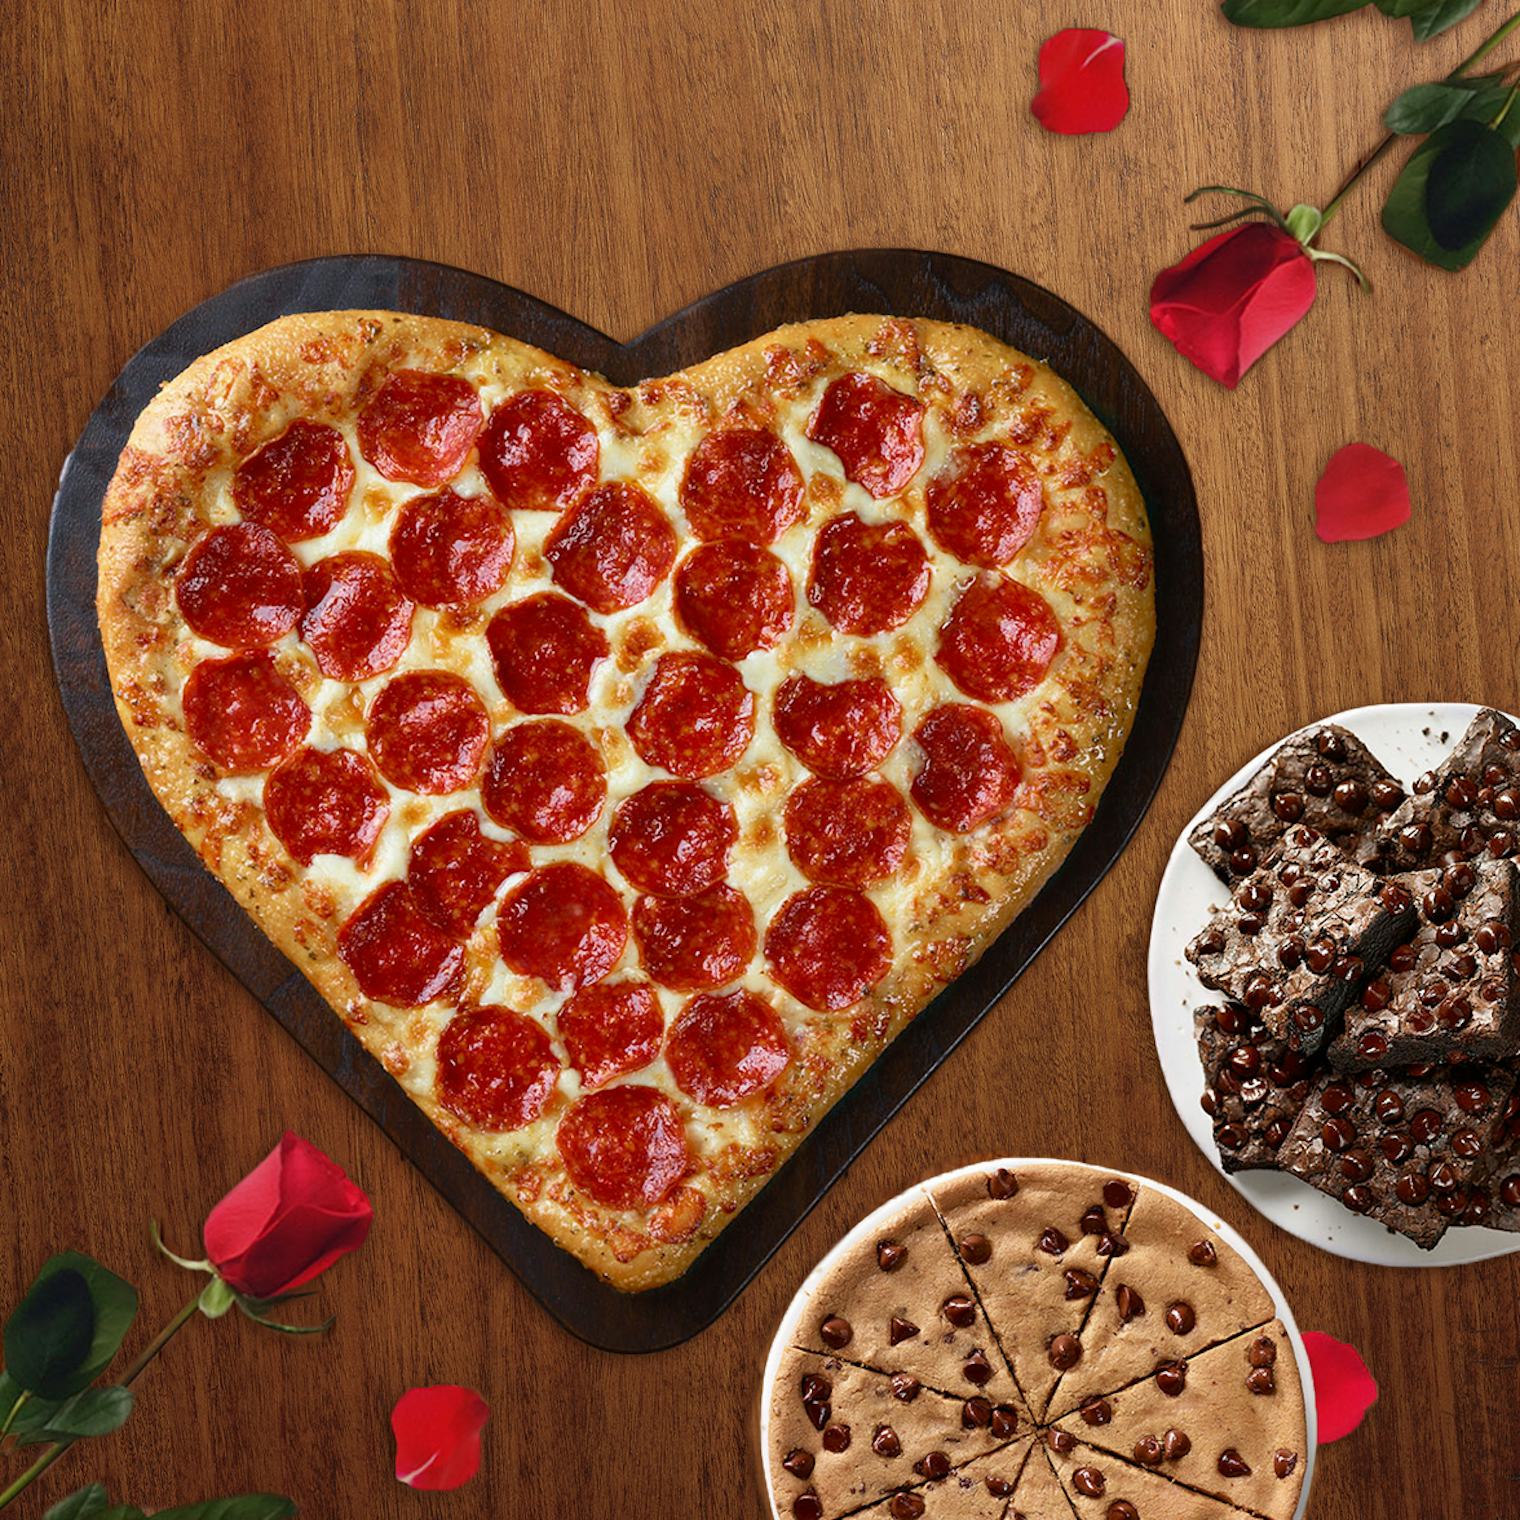 Pizza Hut's Valentine's Day Bundle For 2019 Features A HeartShaped